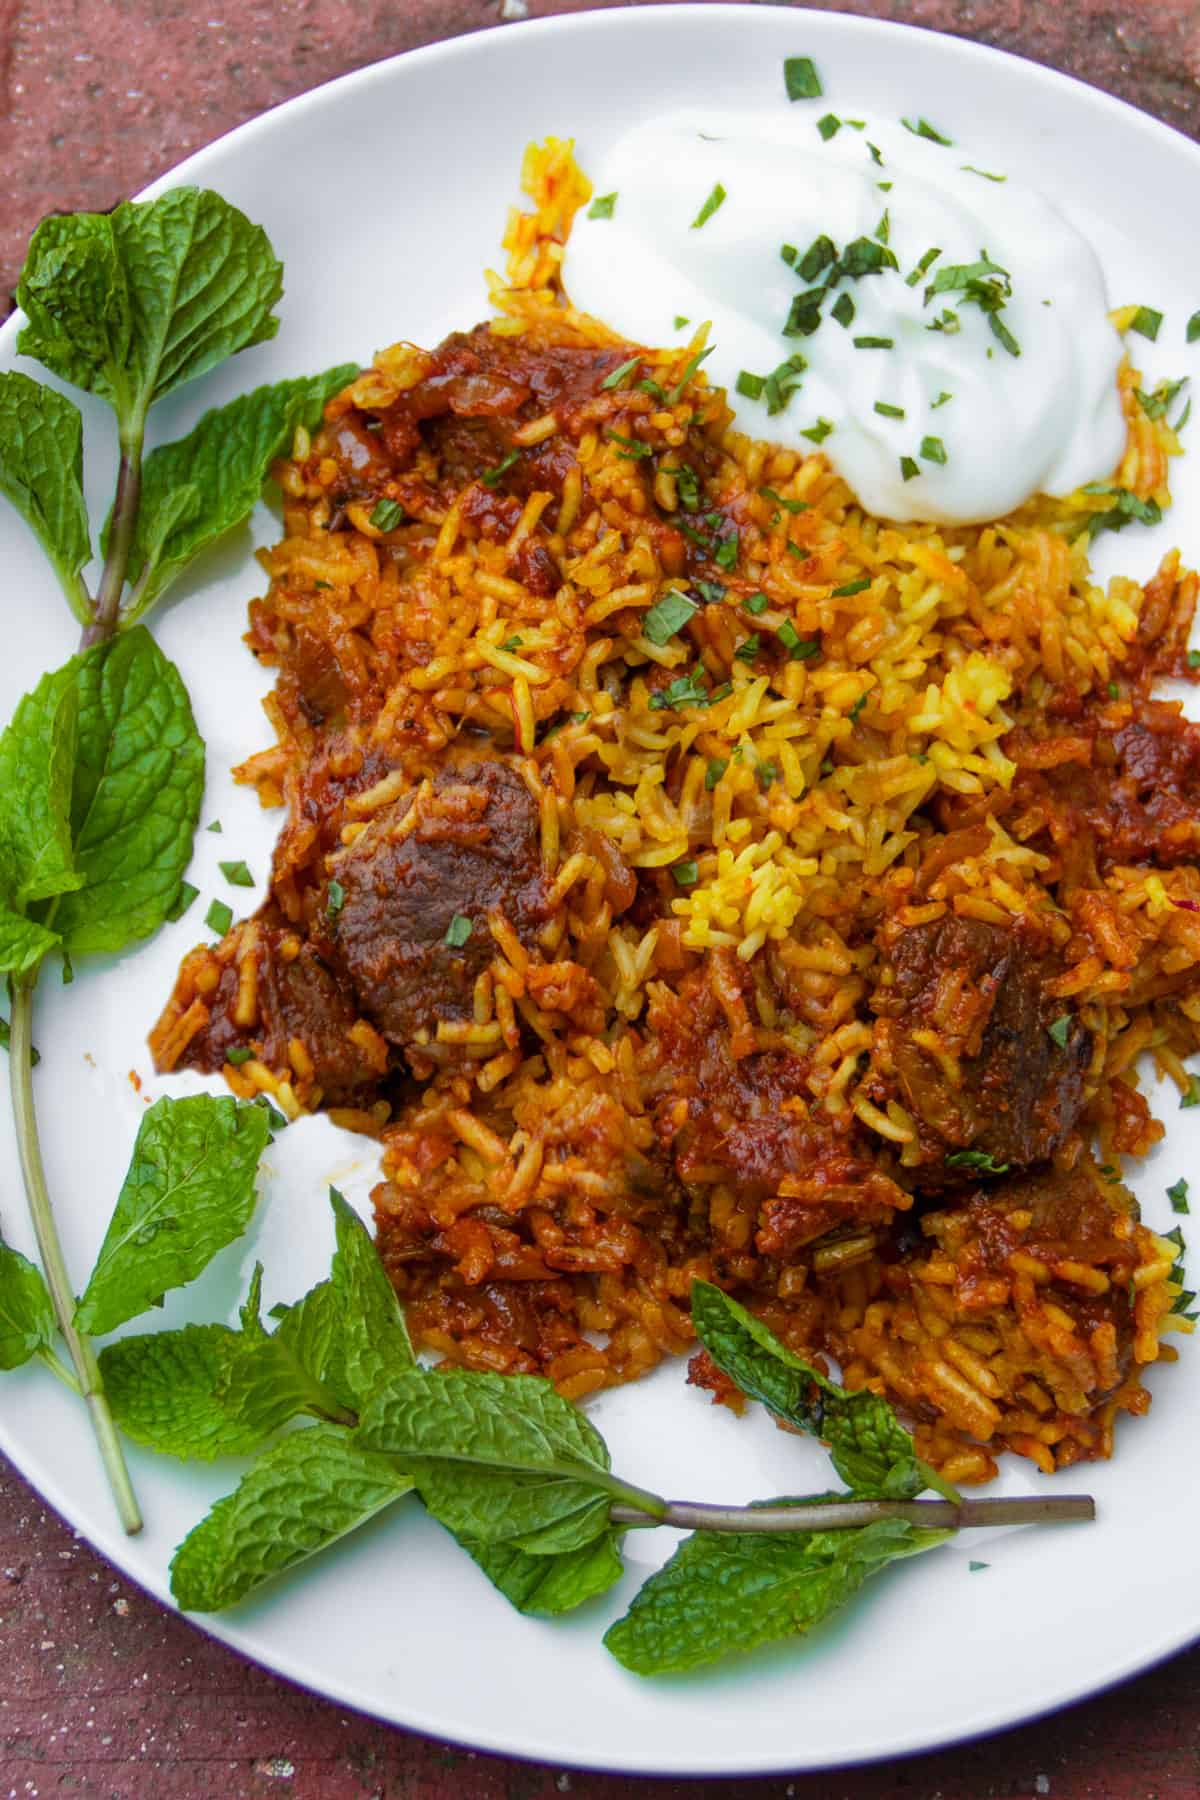 lamb biryani with saffron rice on a plate with a blog of yogurt cucumber raita and two curling sprigs of mint.